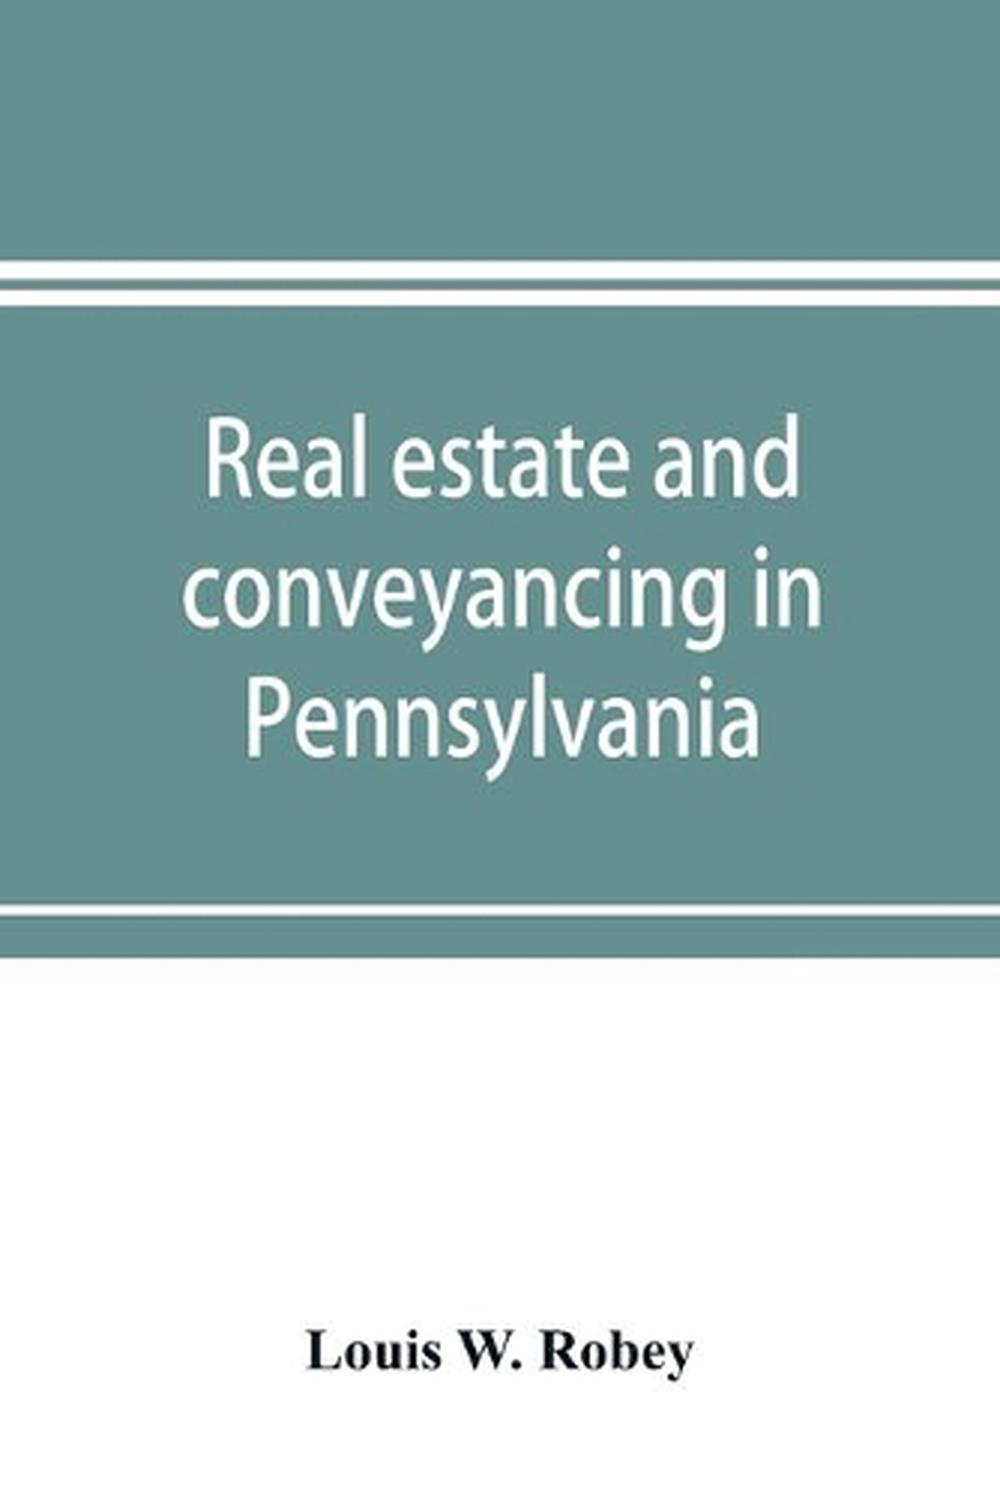 minnesota real estate conveyance forms